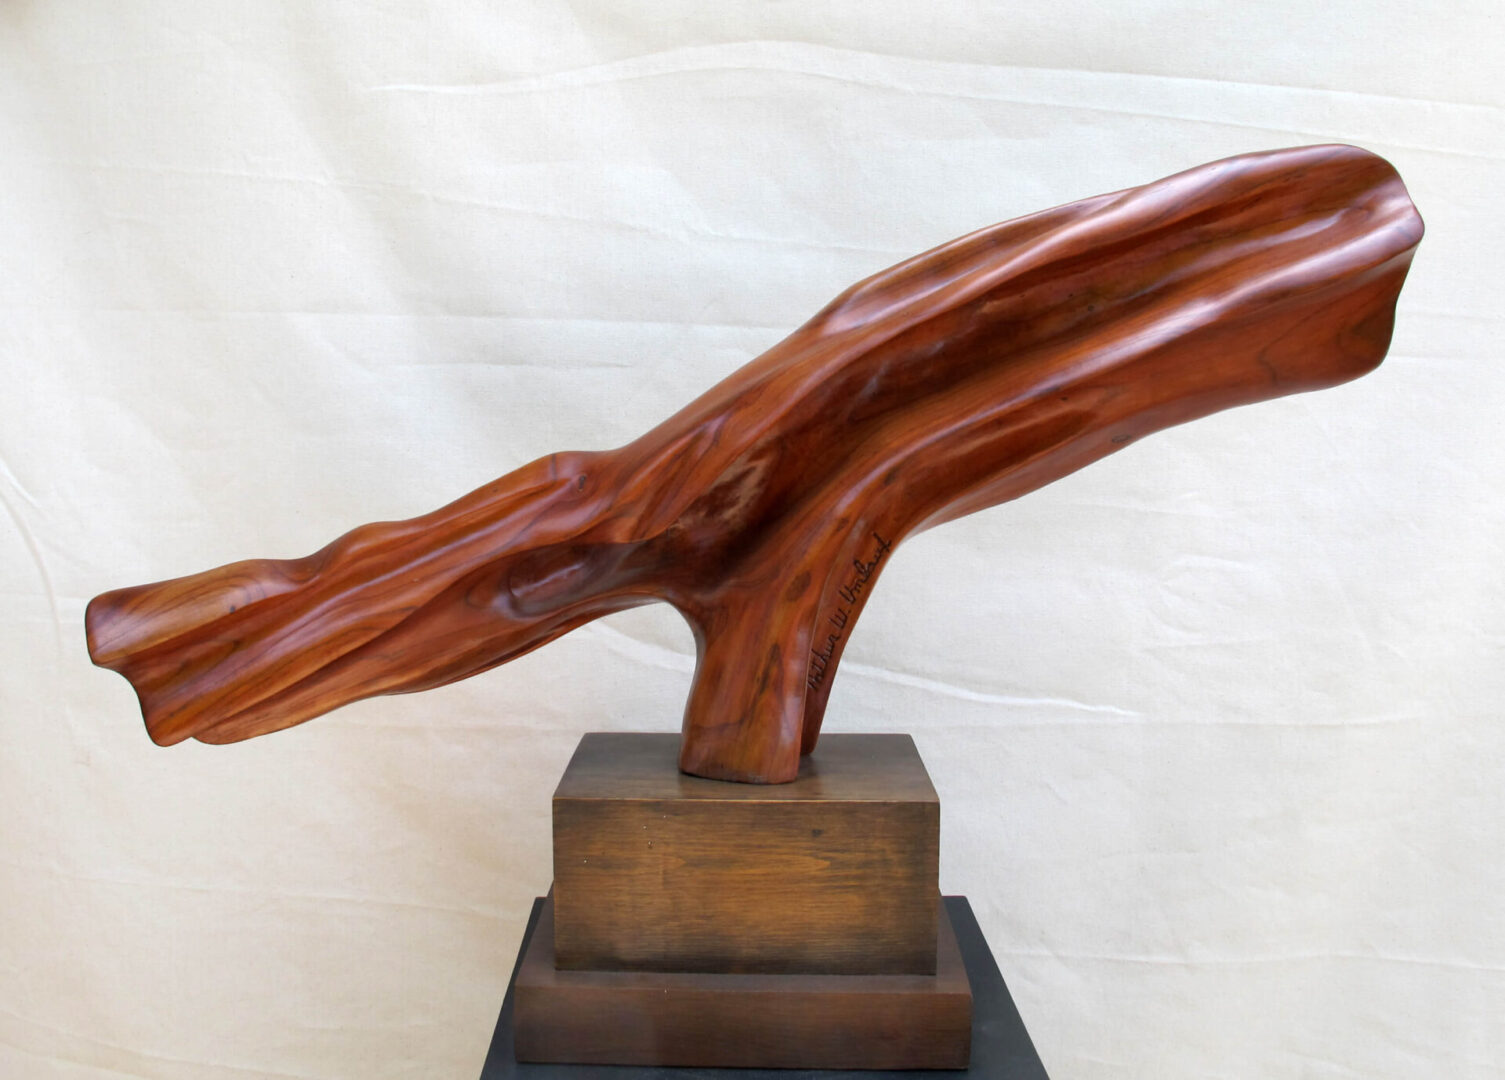 A wooden sculpture of a tree branch on top of a block.